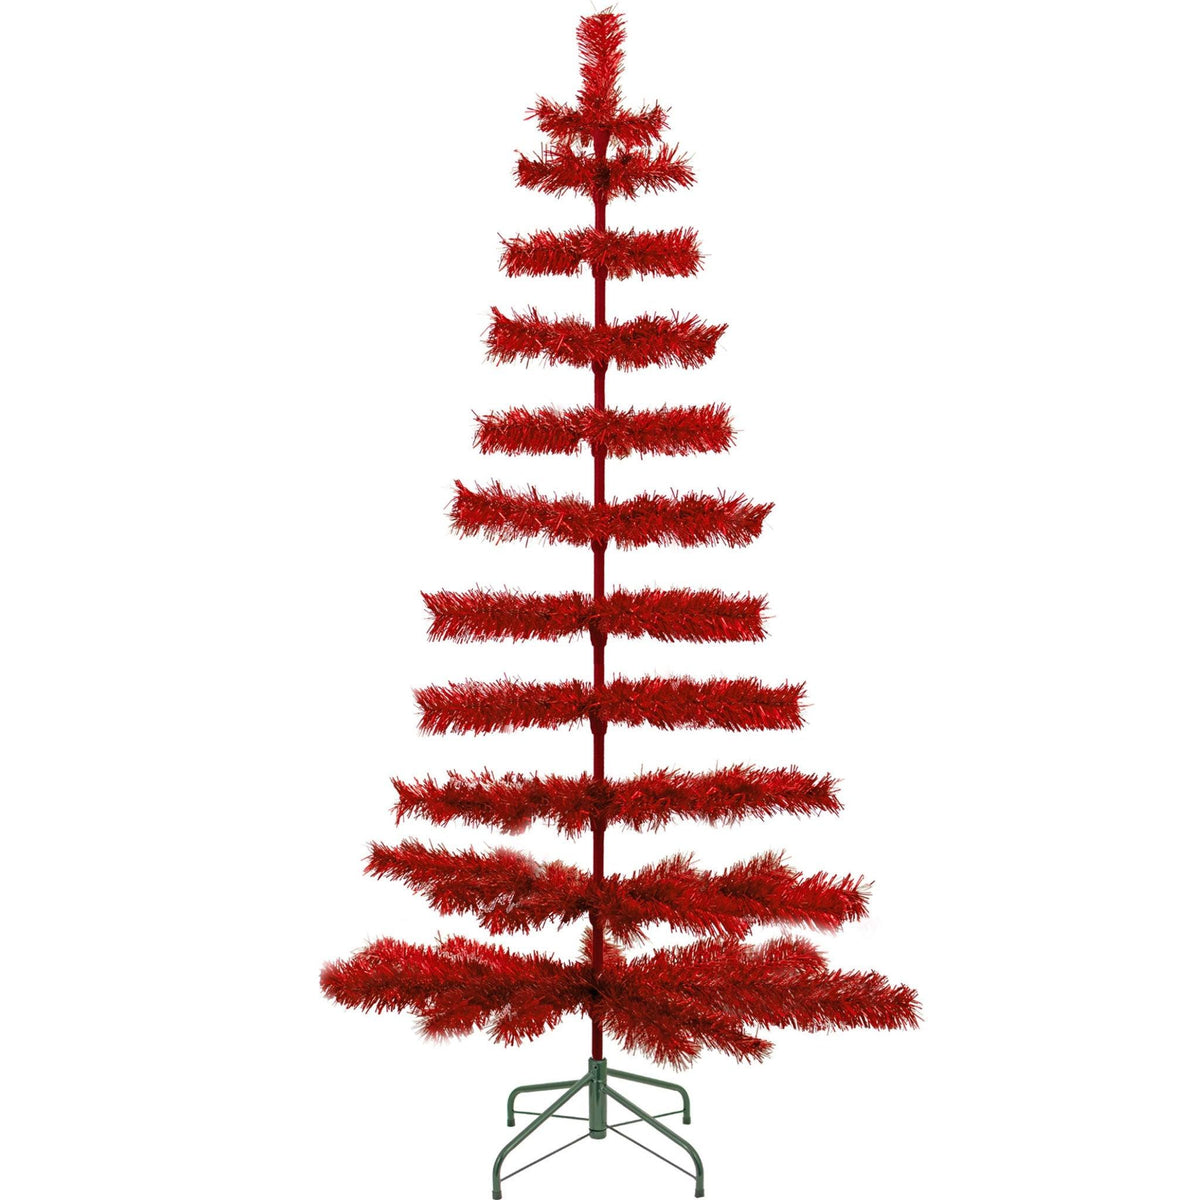 The 60 inch Tall Red Tinsel Christmas Tree from Lee Display. On sale now at leedisplay.com